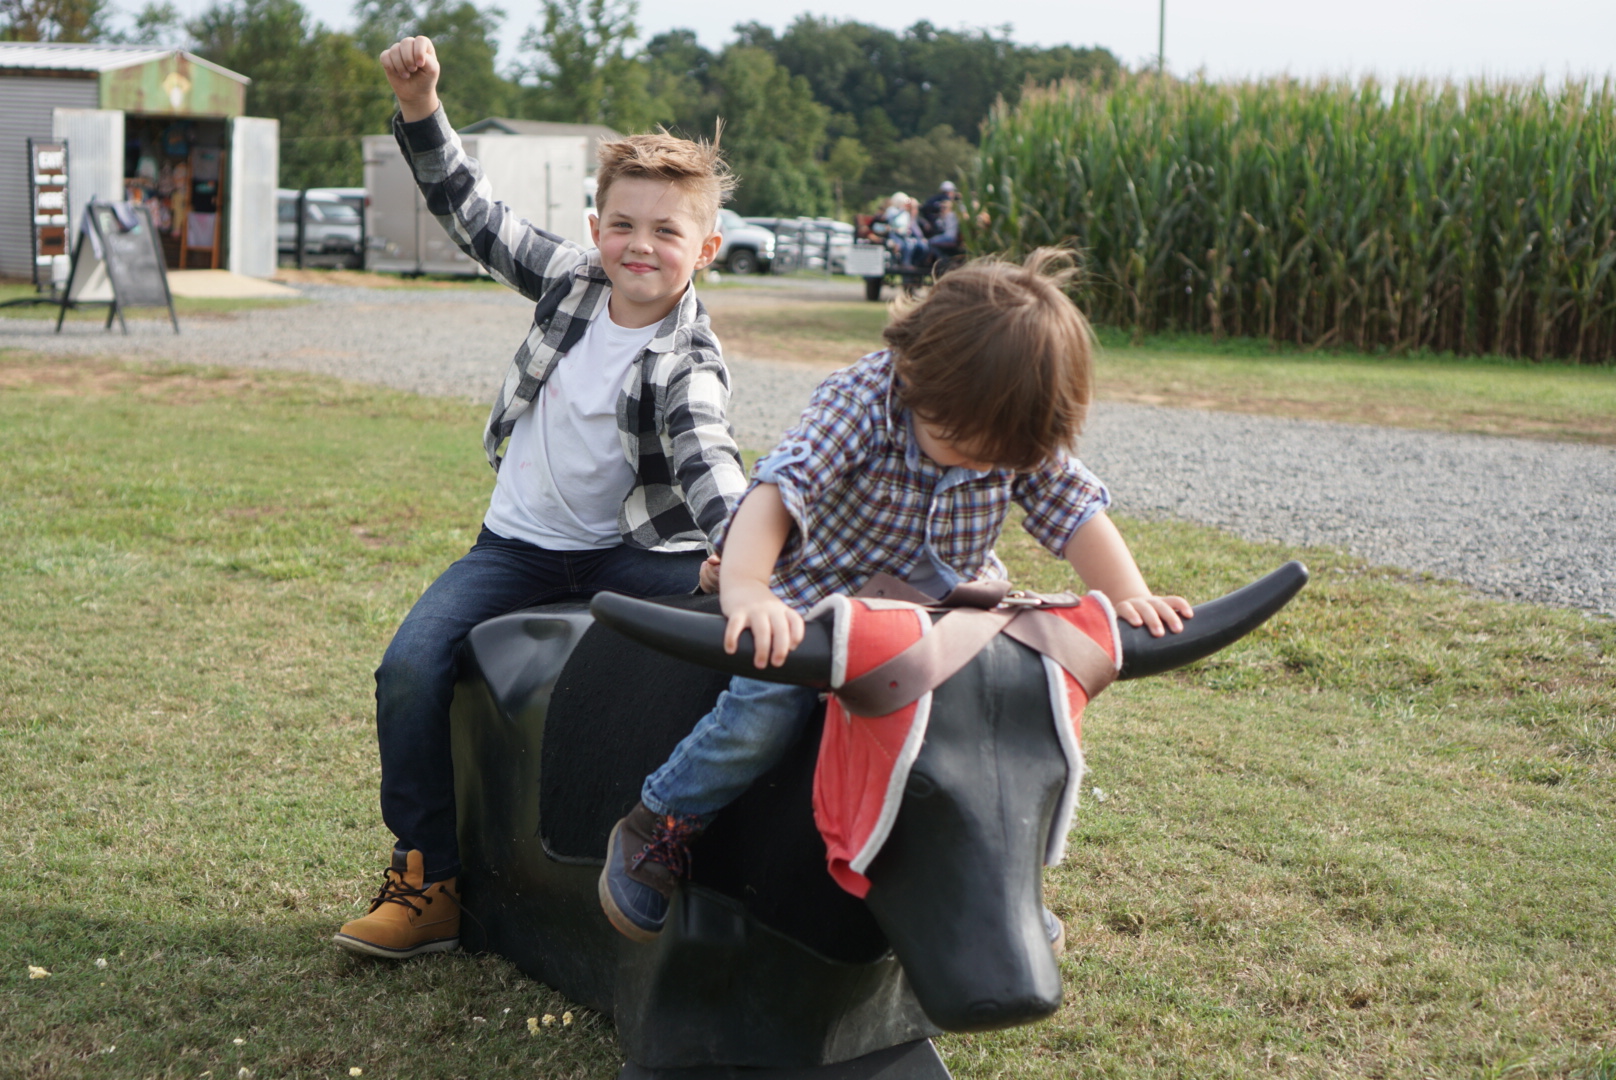 Corn Mazes in NC - Pumpkin Patches and Fall Things to Do - North Carolina - Alpha and Omega - bull rides